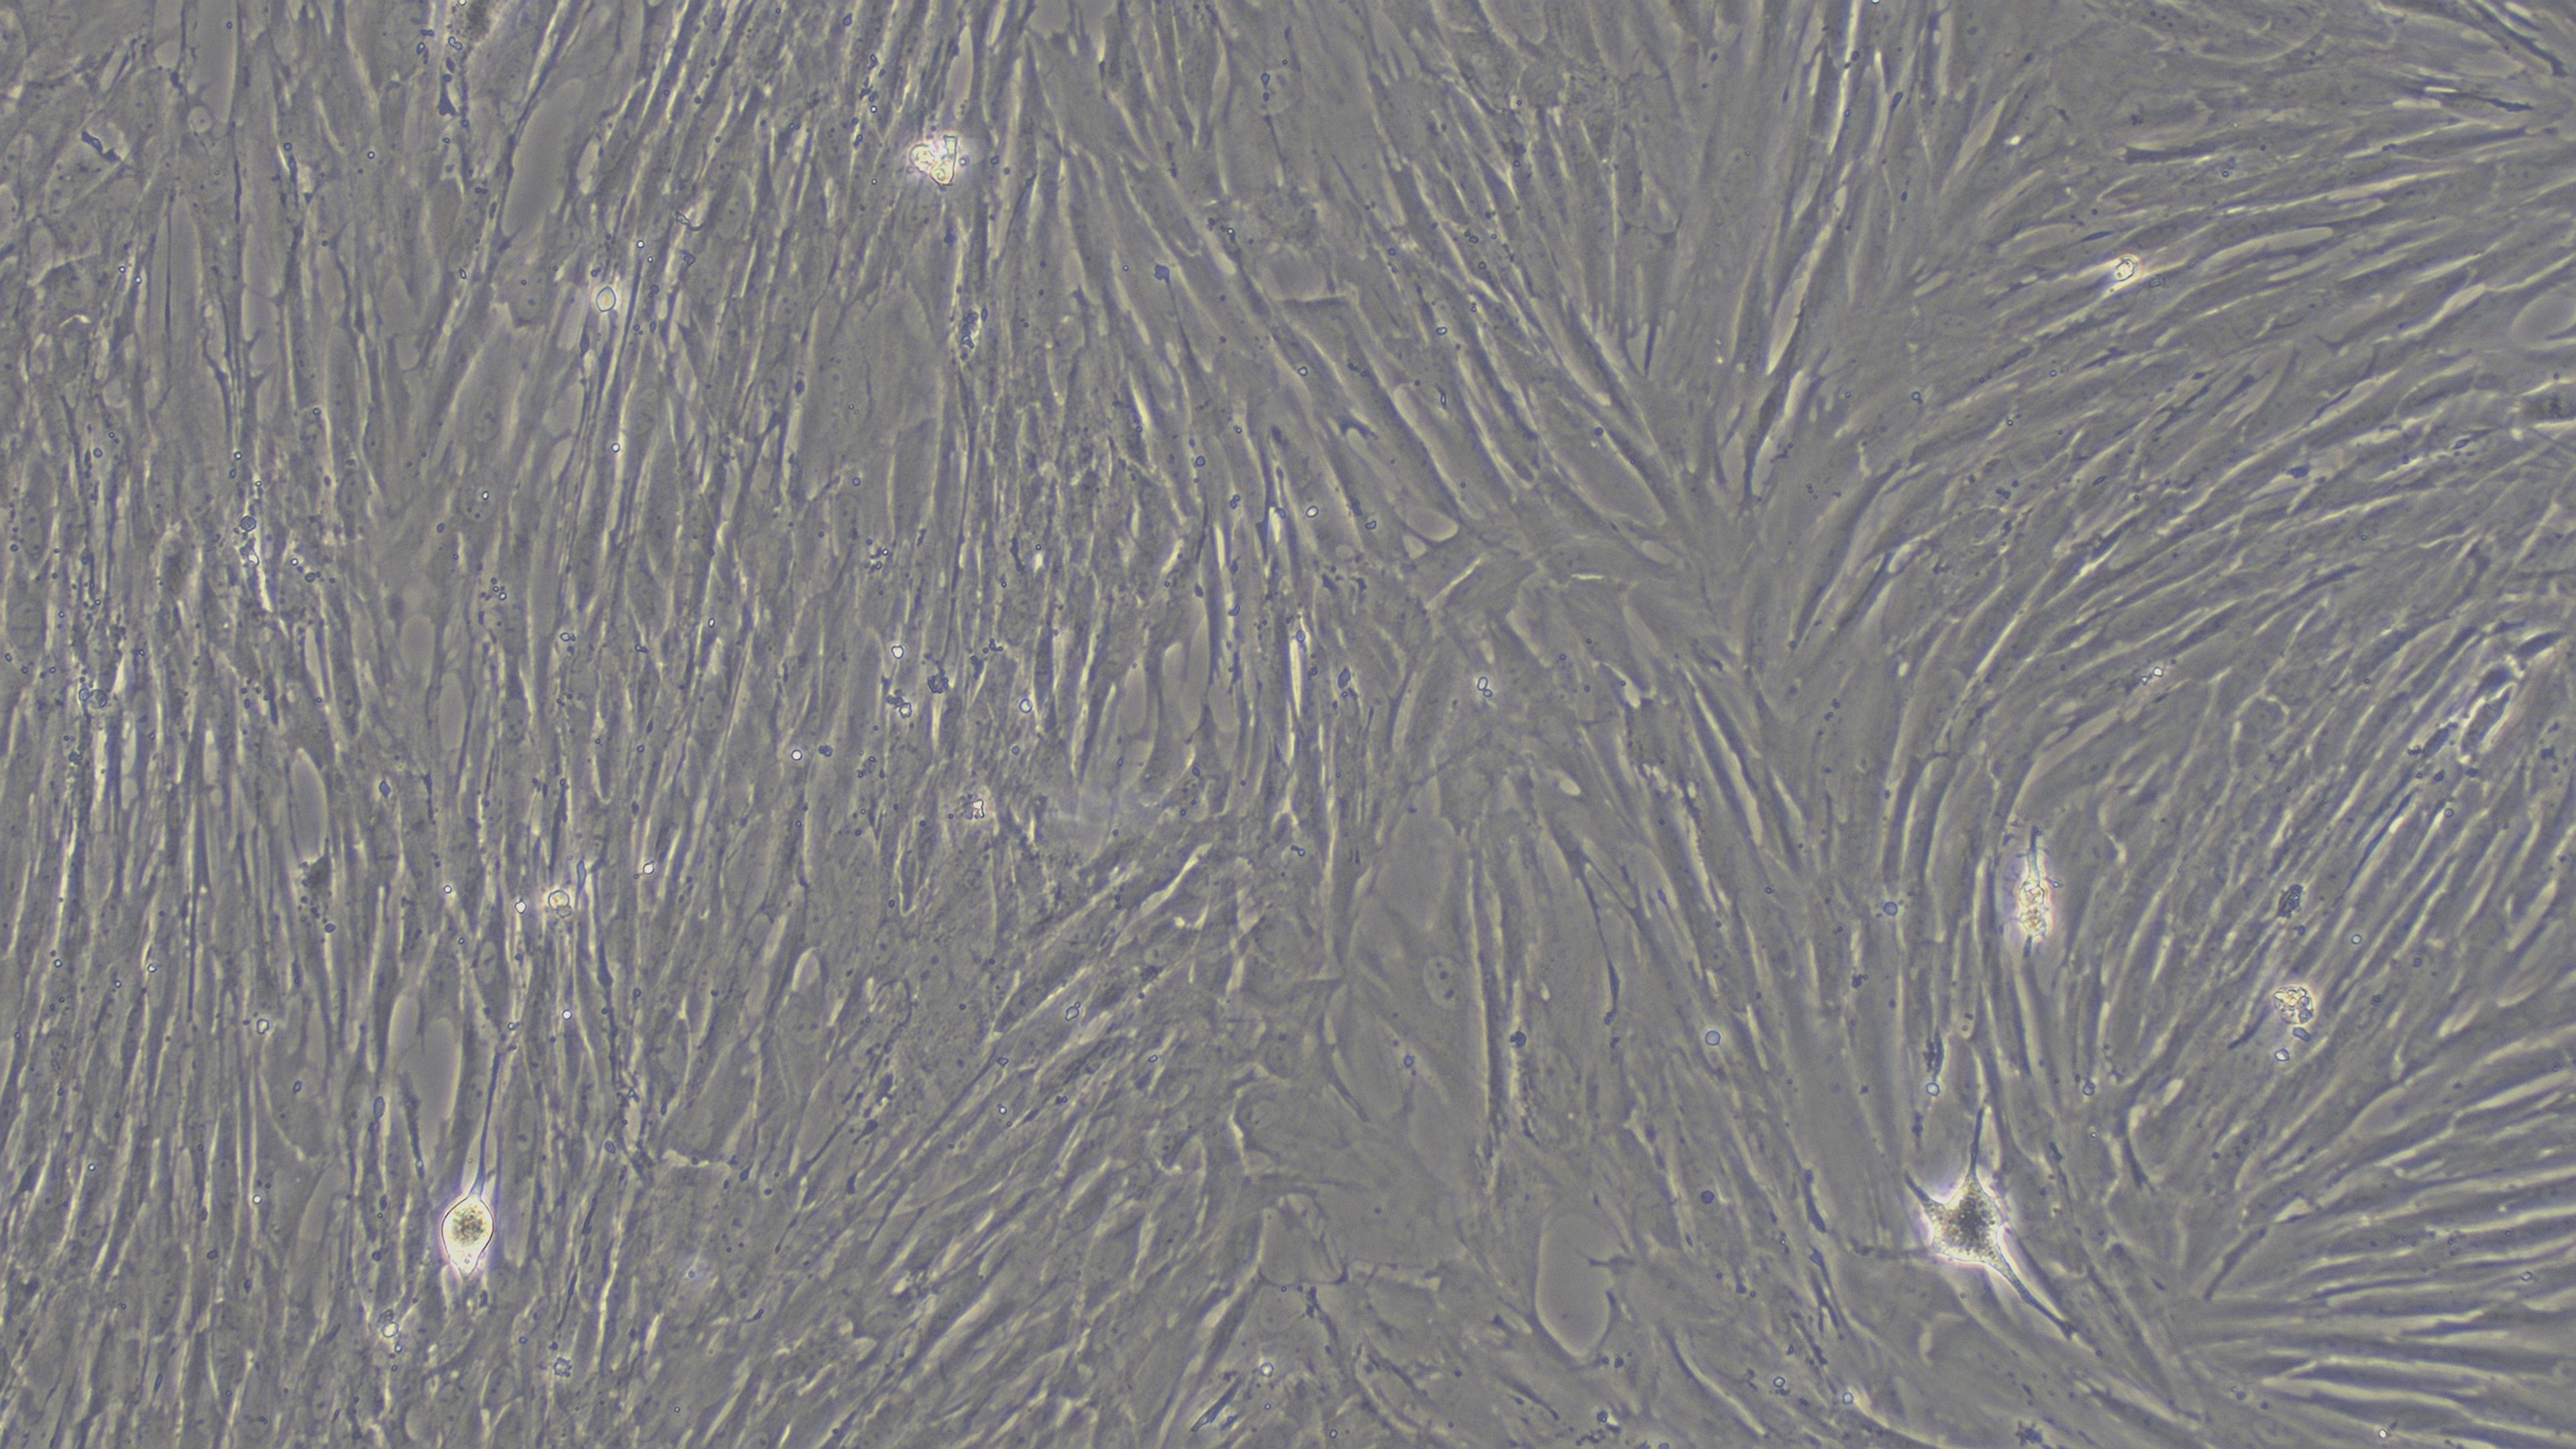 Primary Mouse Bladder Stromal Fibroblasts (BSF)